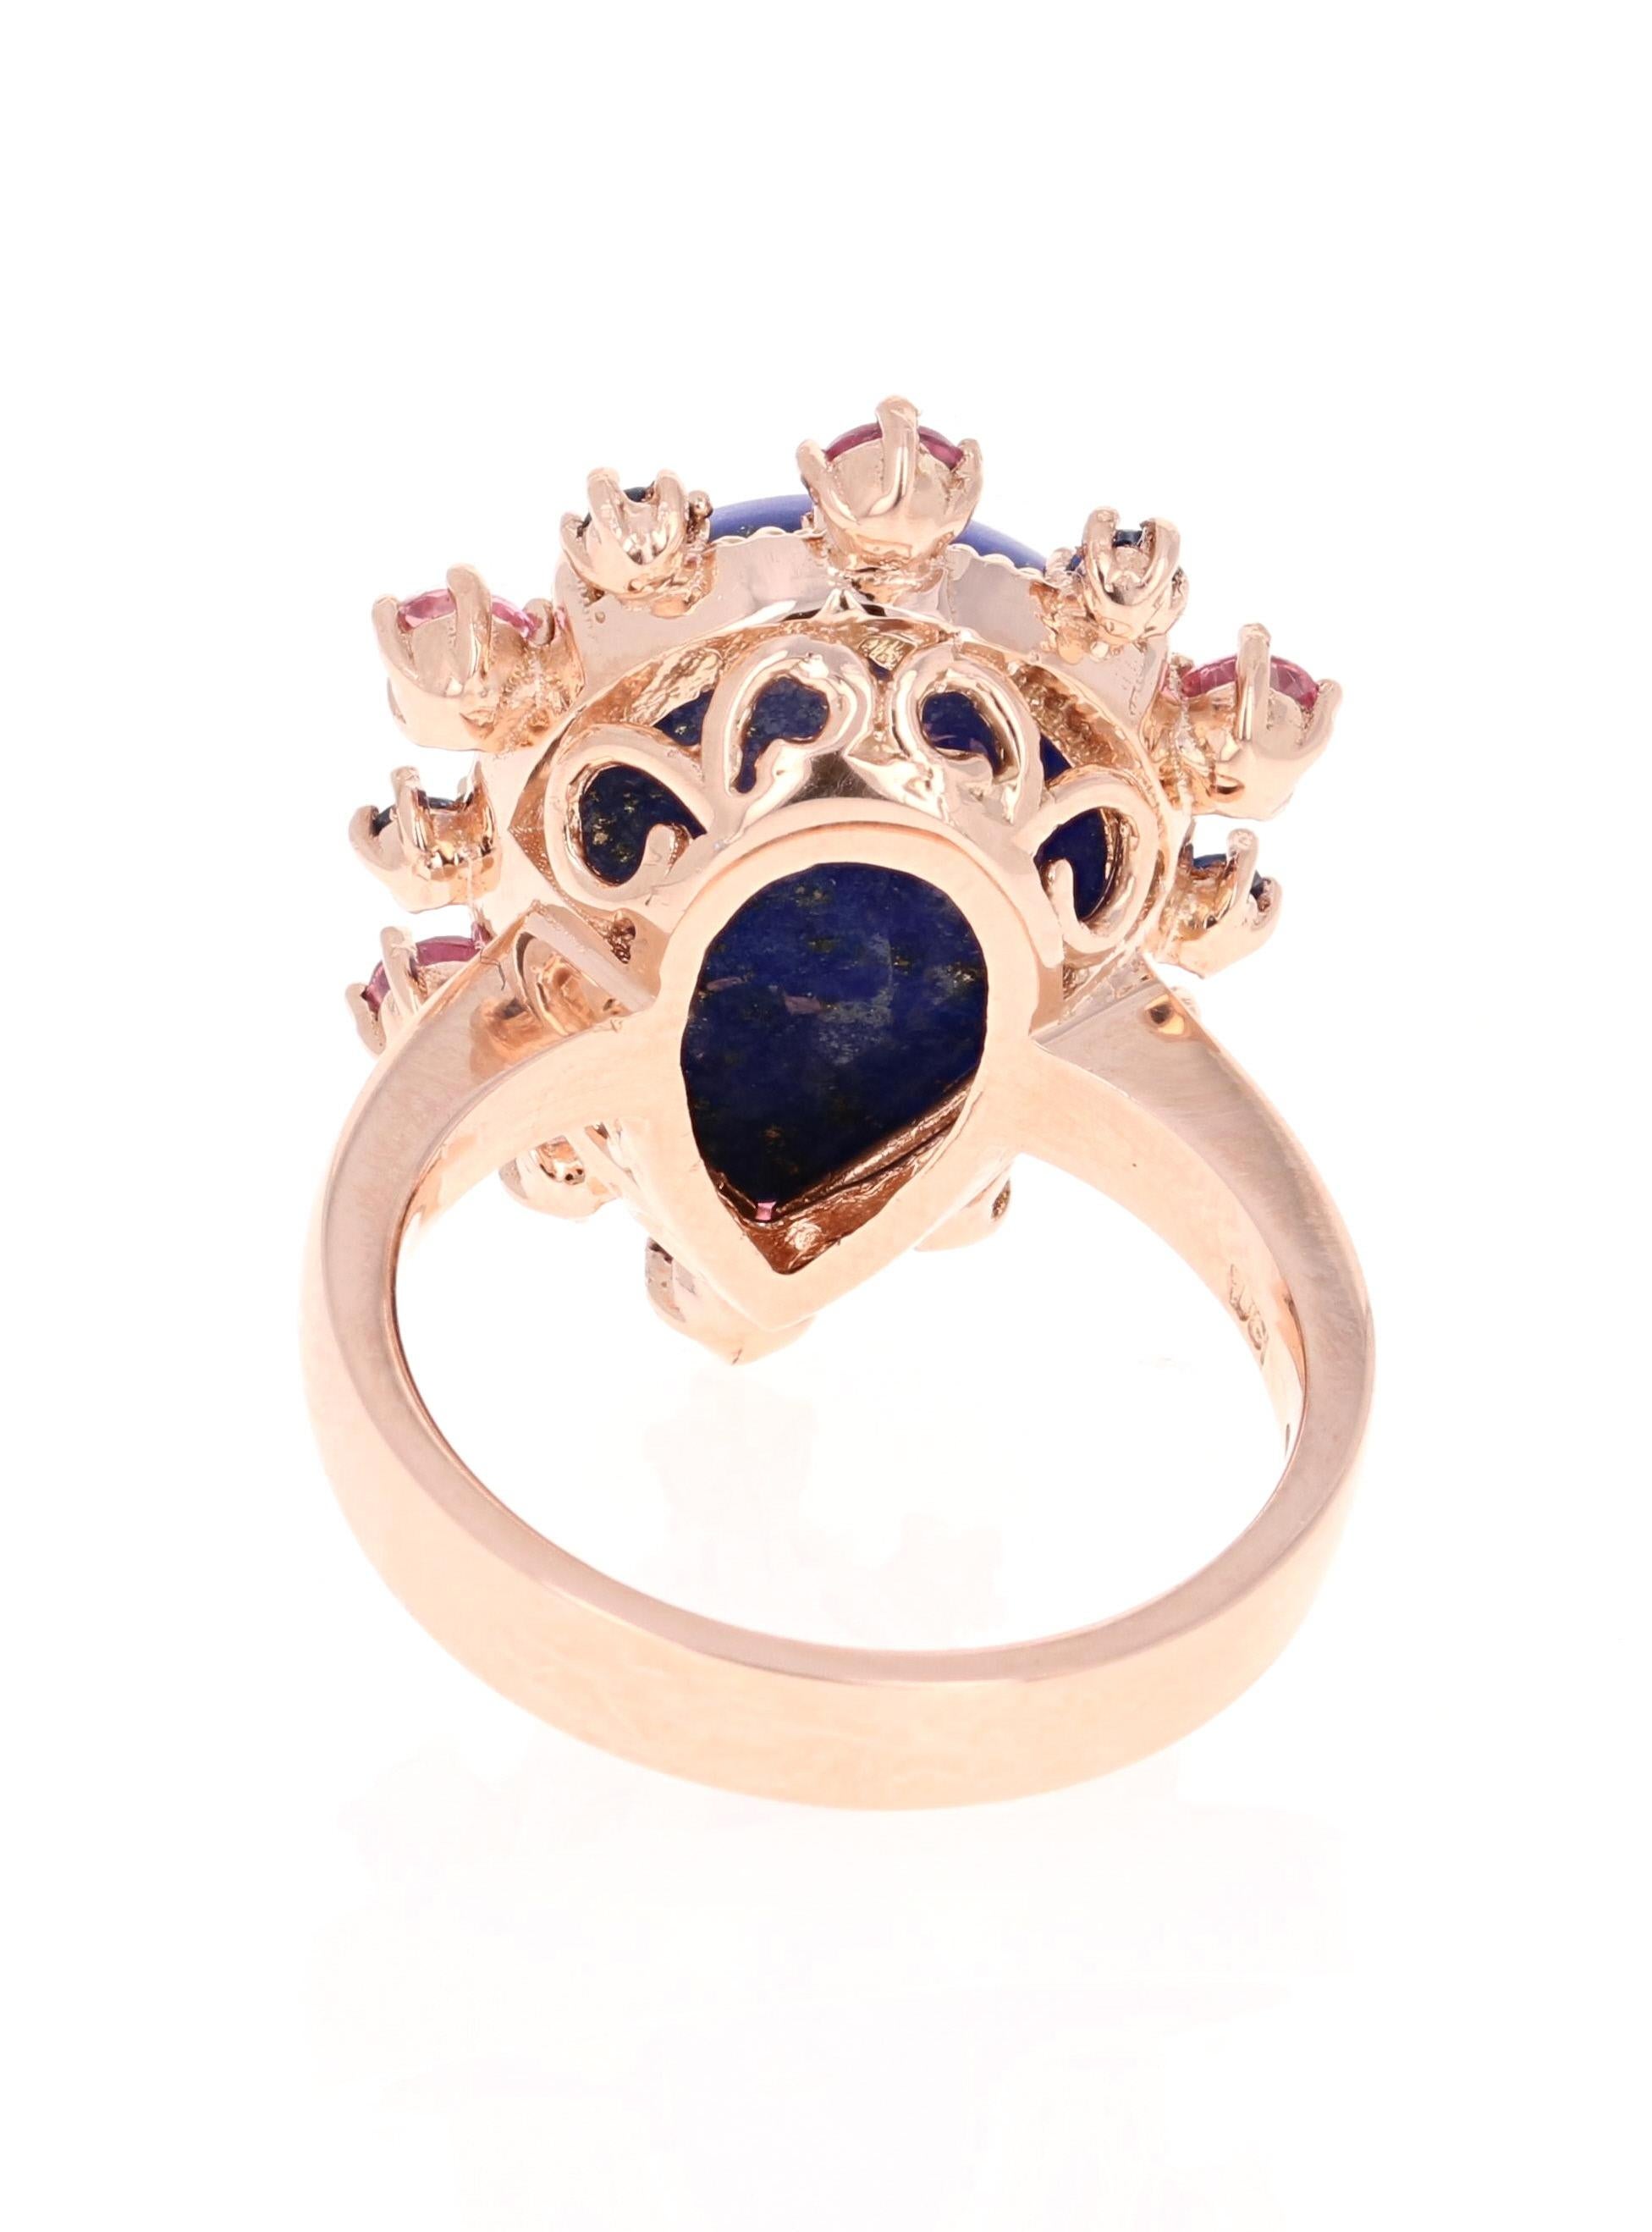 9.04 Carat Lapis Lazuli Tourmaline and Sapphire Cocktail Rose Gold Ring In New Condition For Sale In Los Angeles, CA